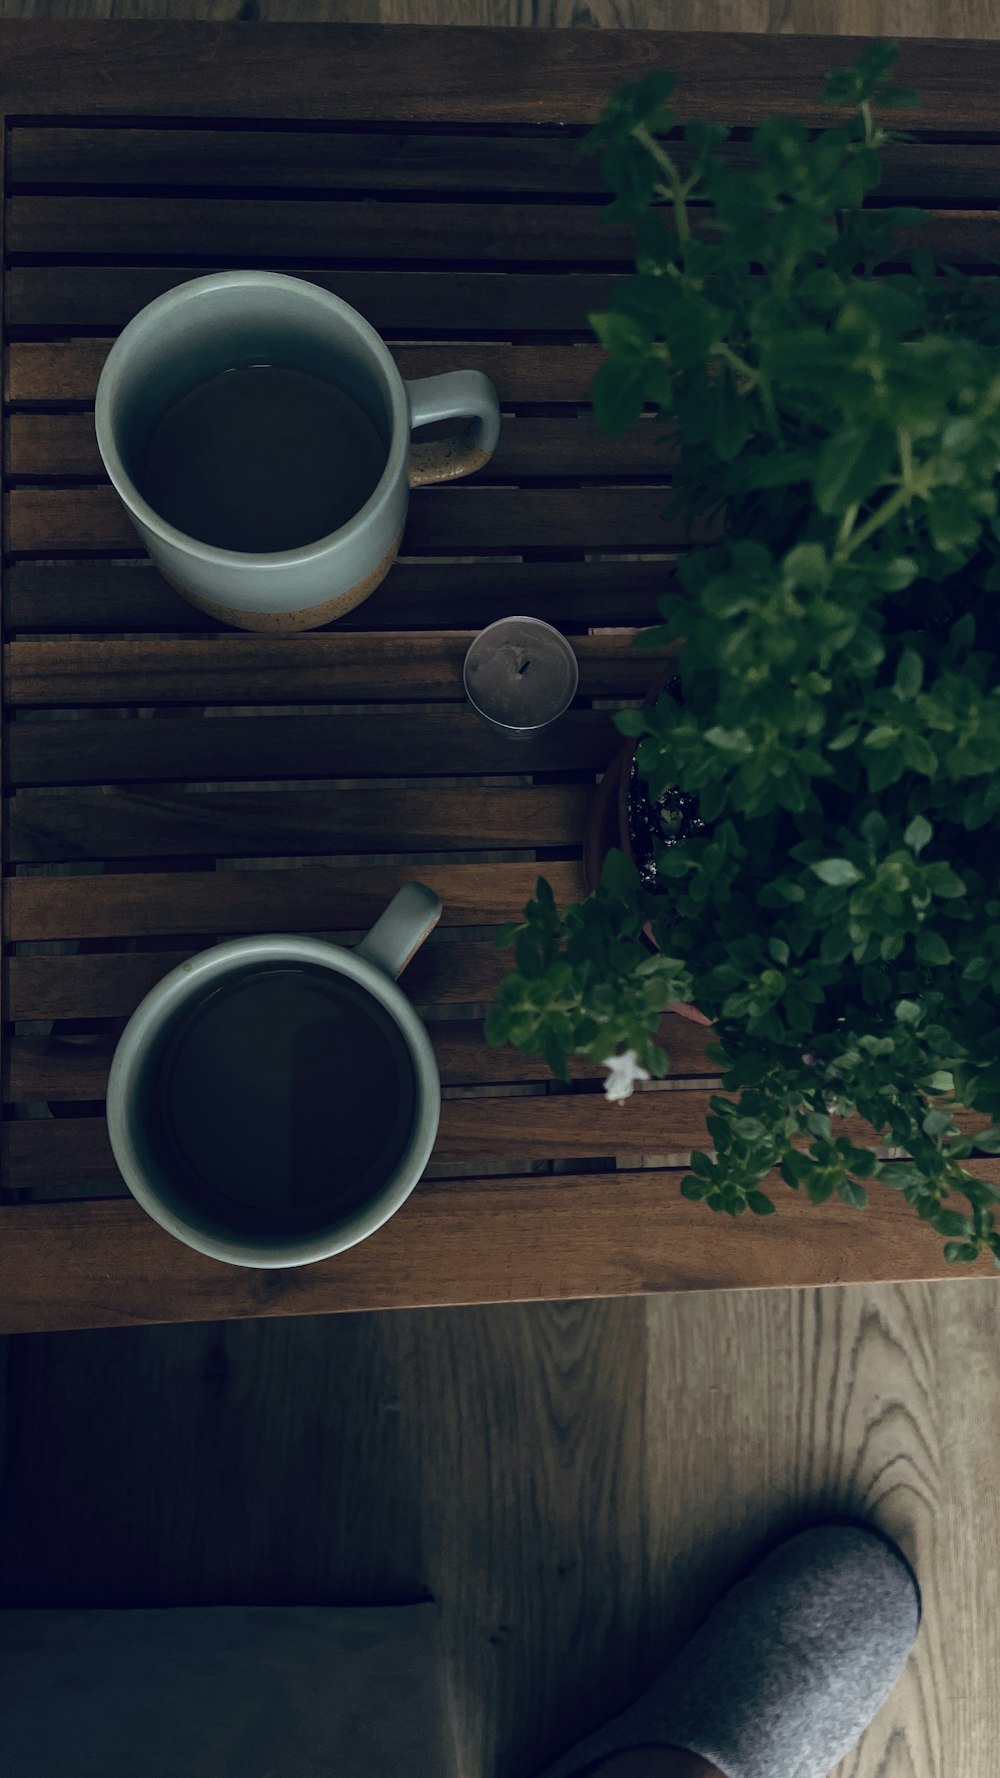 two cups of coffee on a wooden table